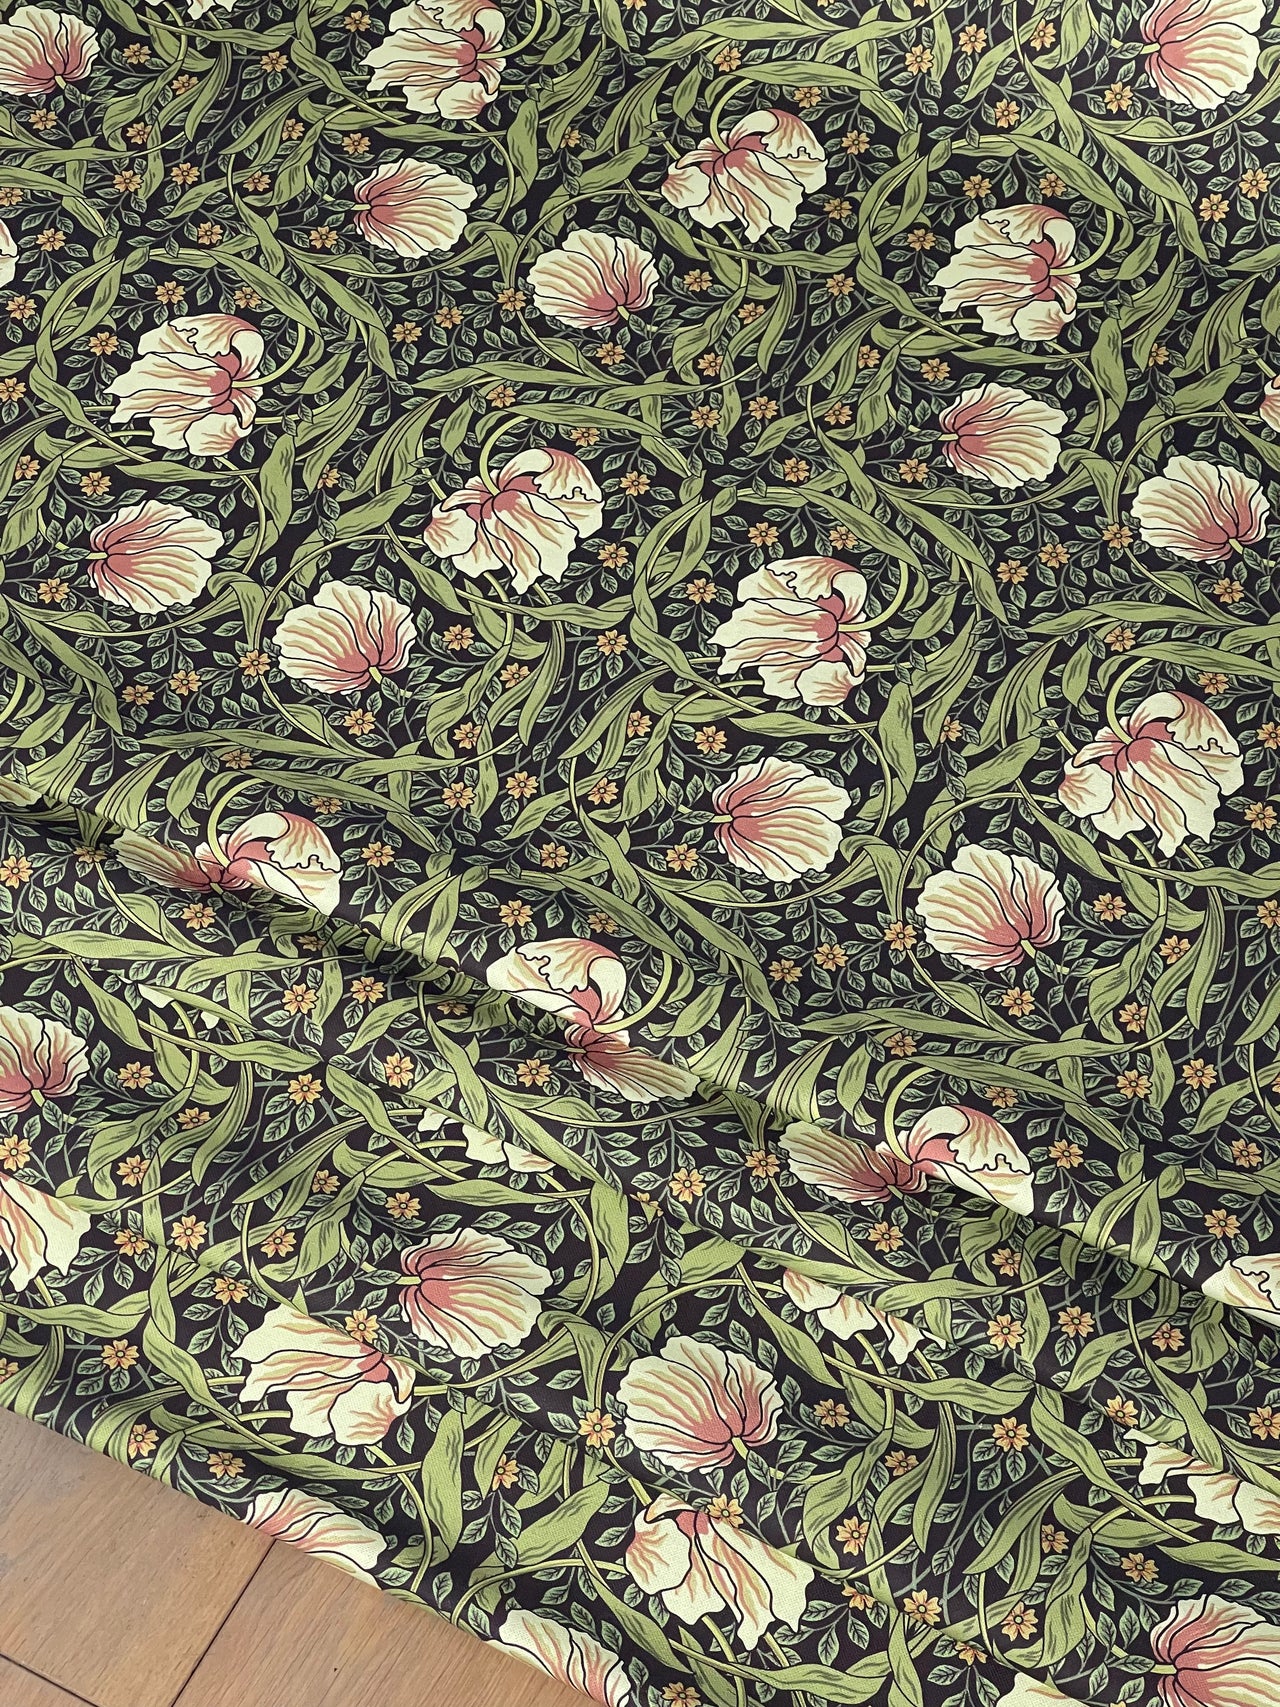 Vintage Style William Morris Fabric - Pimpernel Pattern with Tulips - Cotton Print, Sold by the Meter